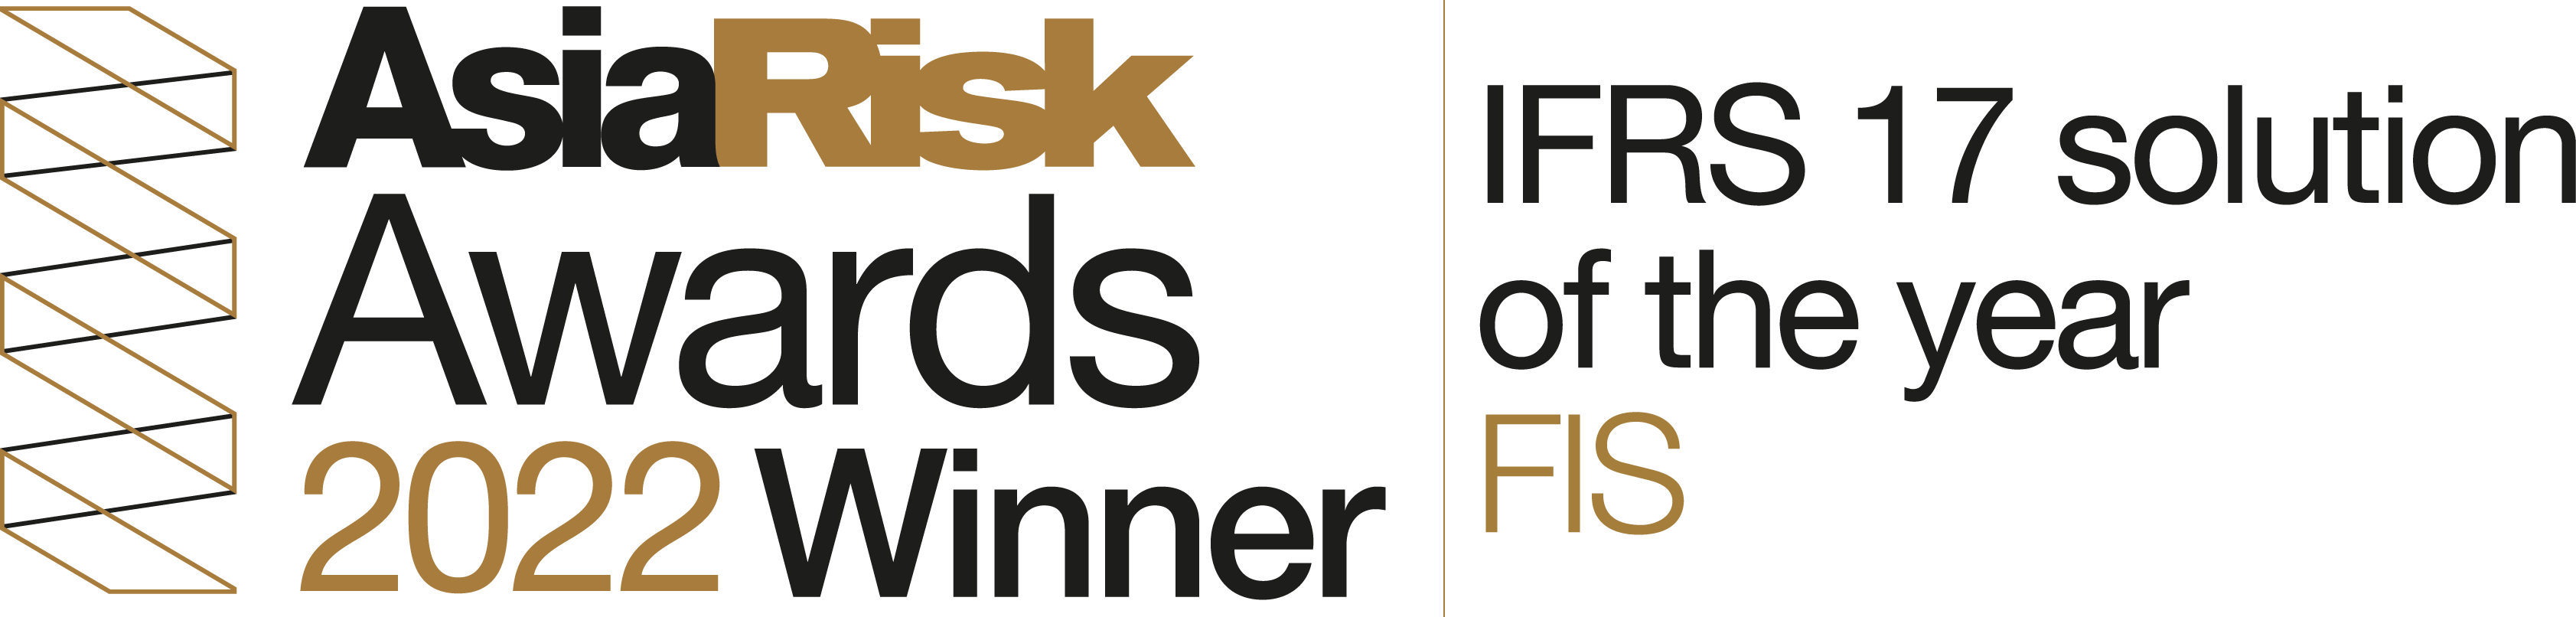 AsiaRisk2022-IFRS17 Solution of the Year